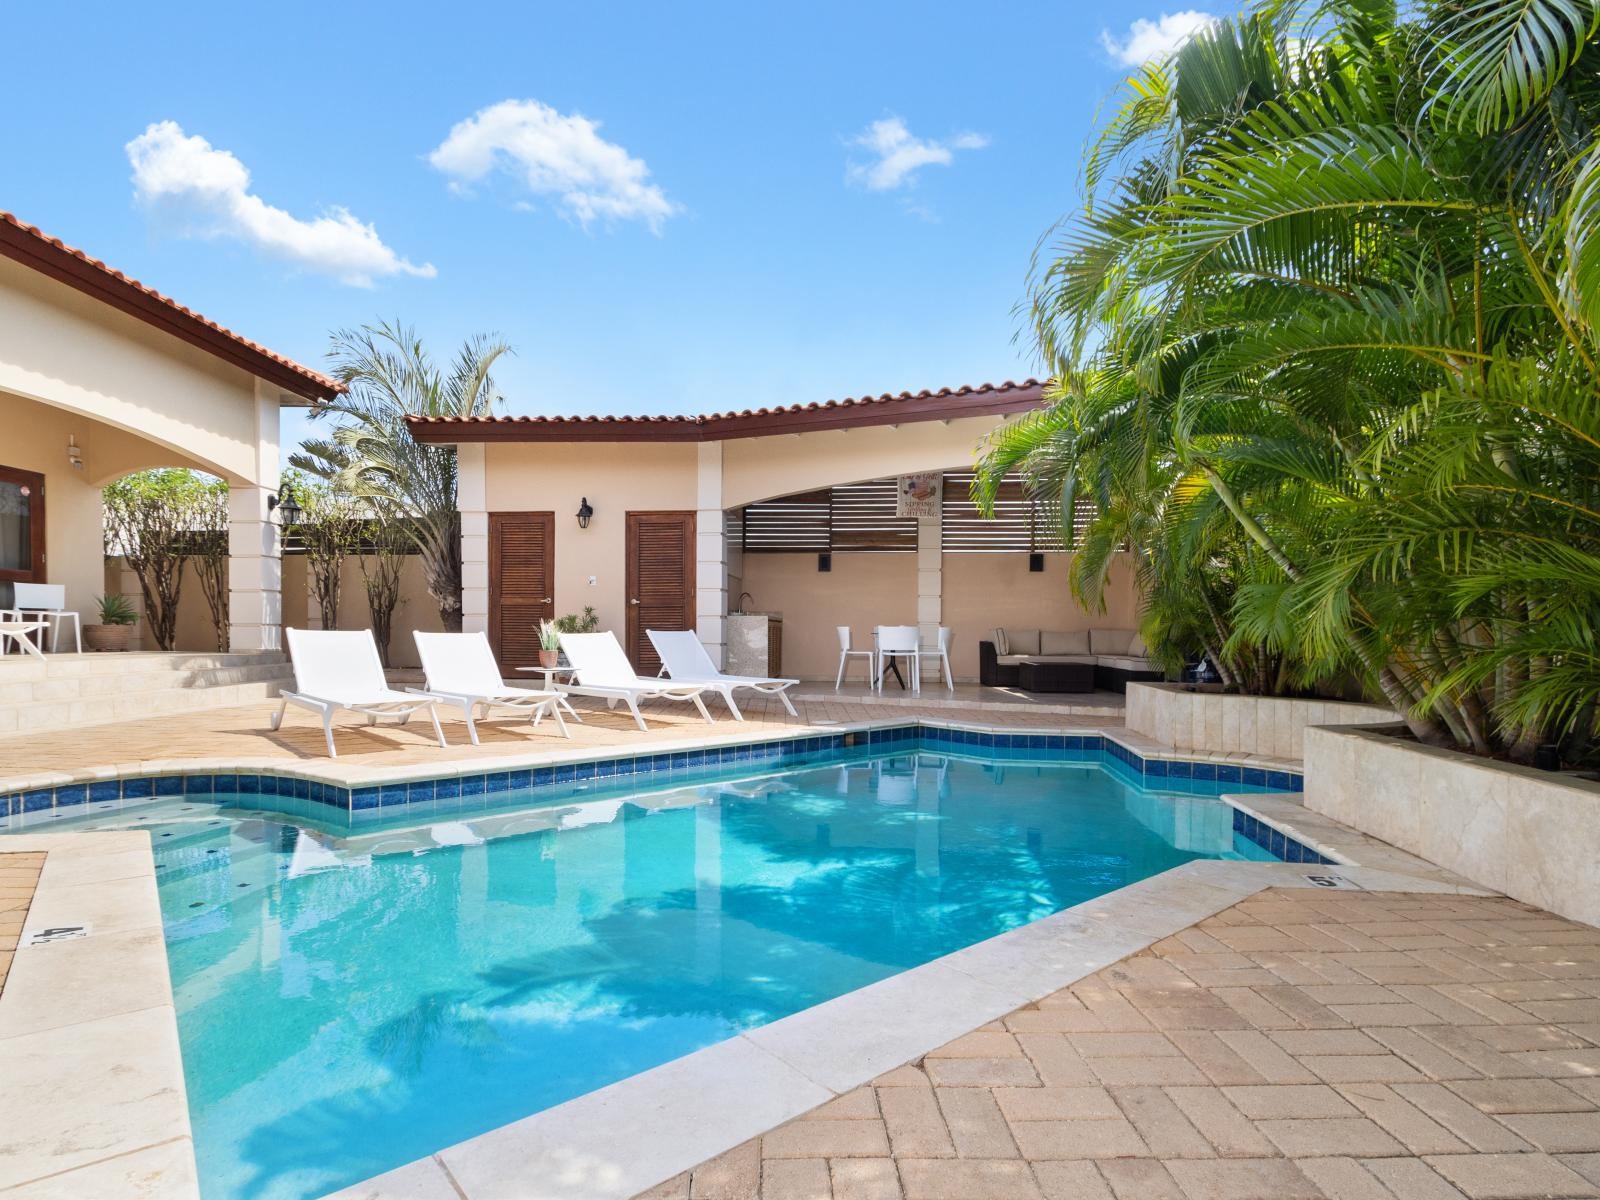 Enjoy the private pool alongside covered outdoor seating areas, ideal for relaxing and entertaining in comfort.